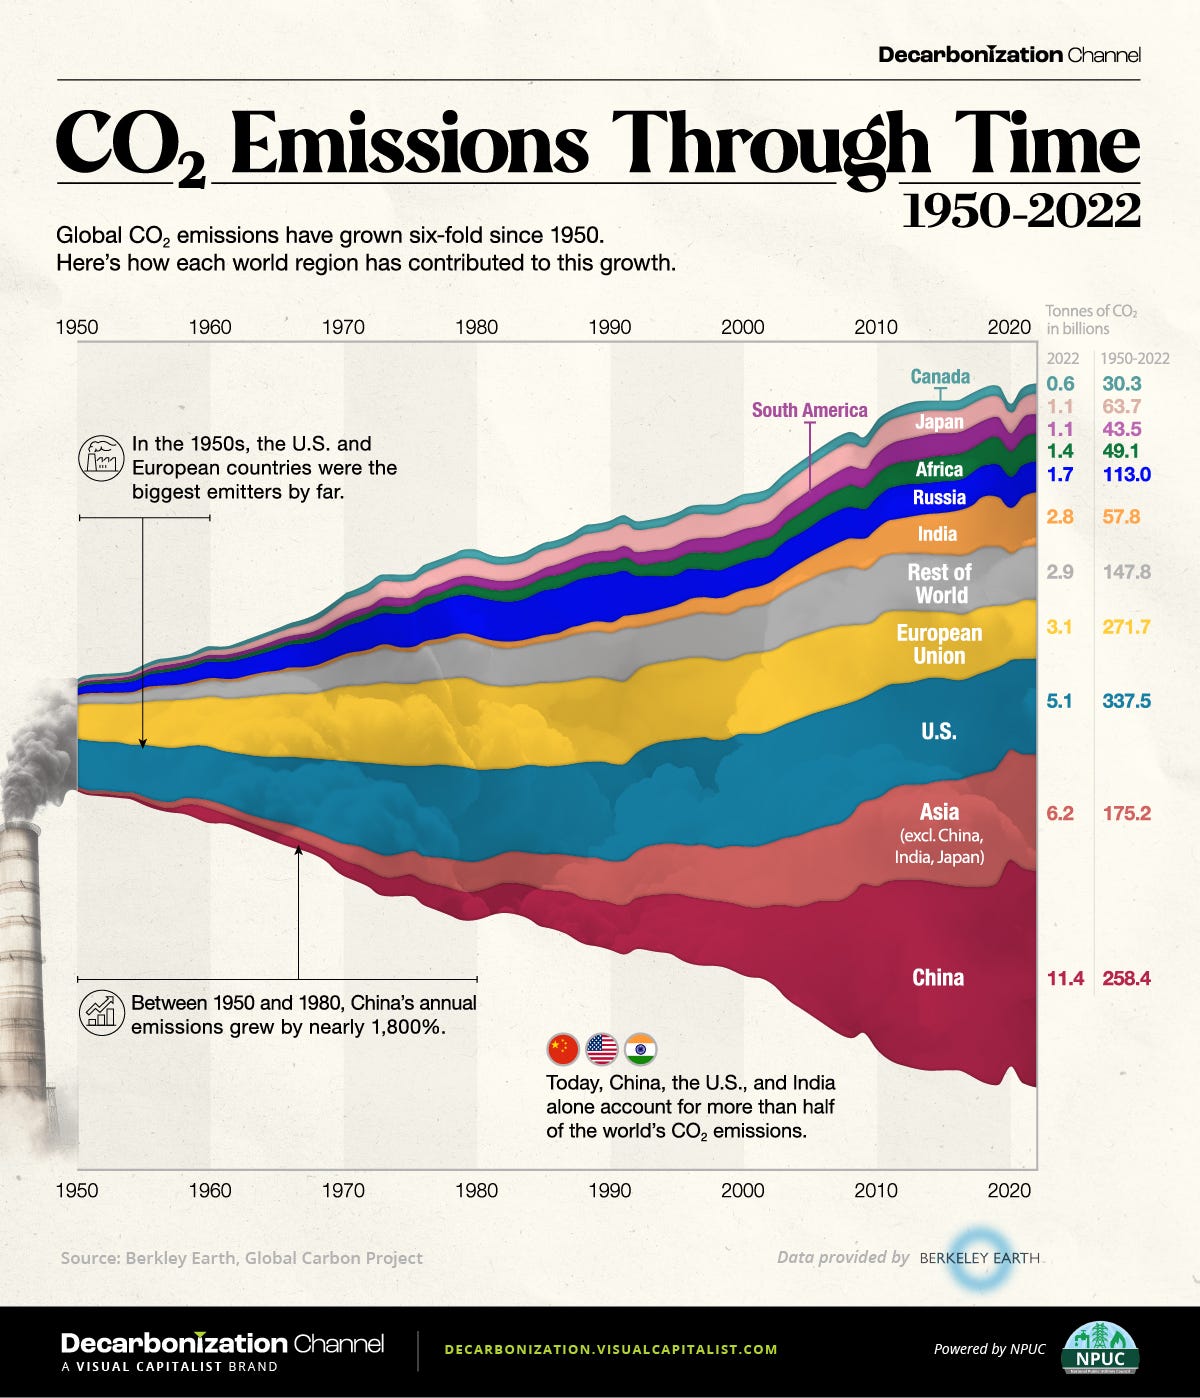 A streamgraph showing global CO2 emissions between 1950-2022, broken down by region.